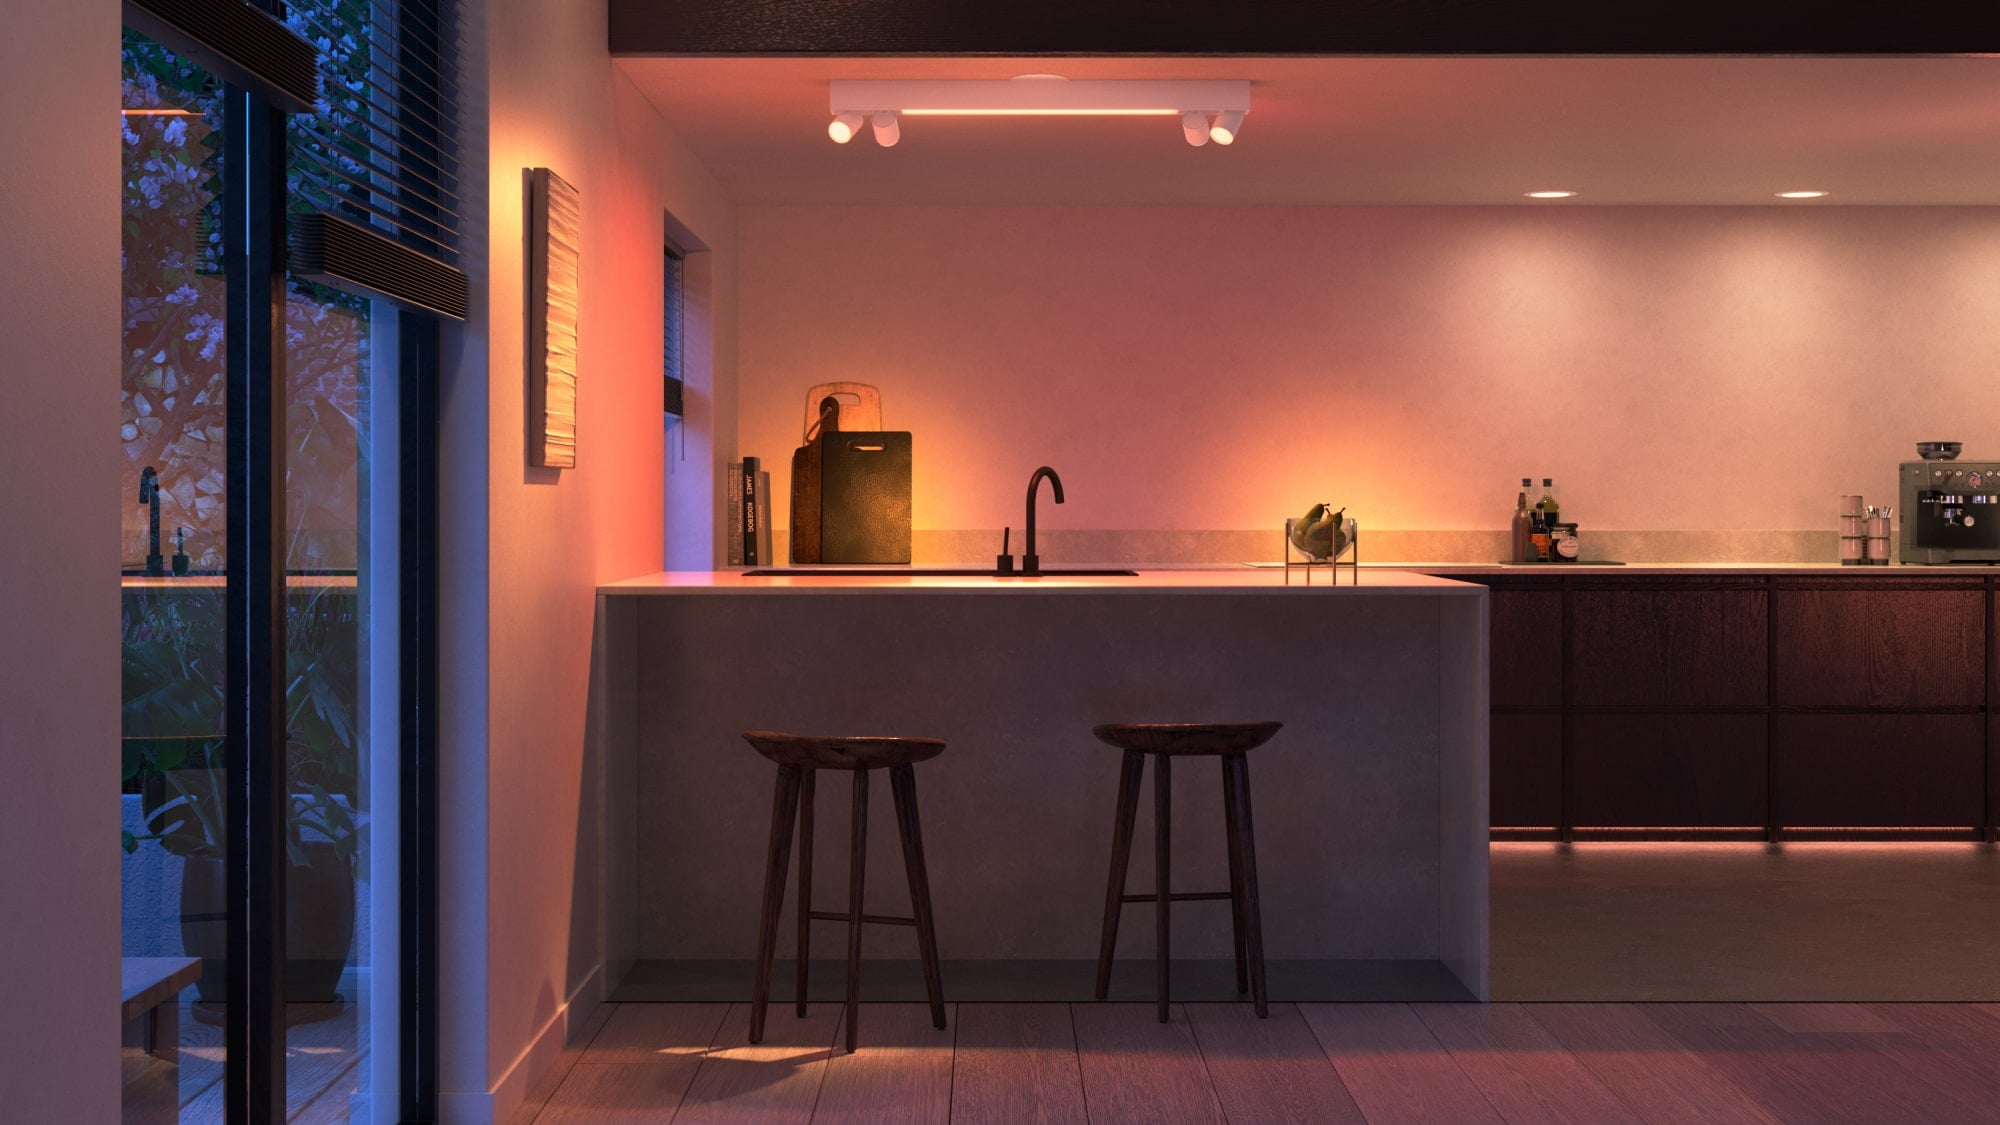 https://www.philips-hue.com/content/dam/hue/masters/products-overview/kitchen-lighting/kitchen-fallback-16-9.jpg